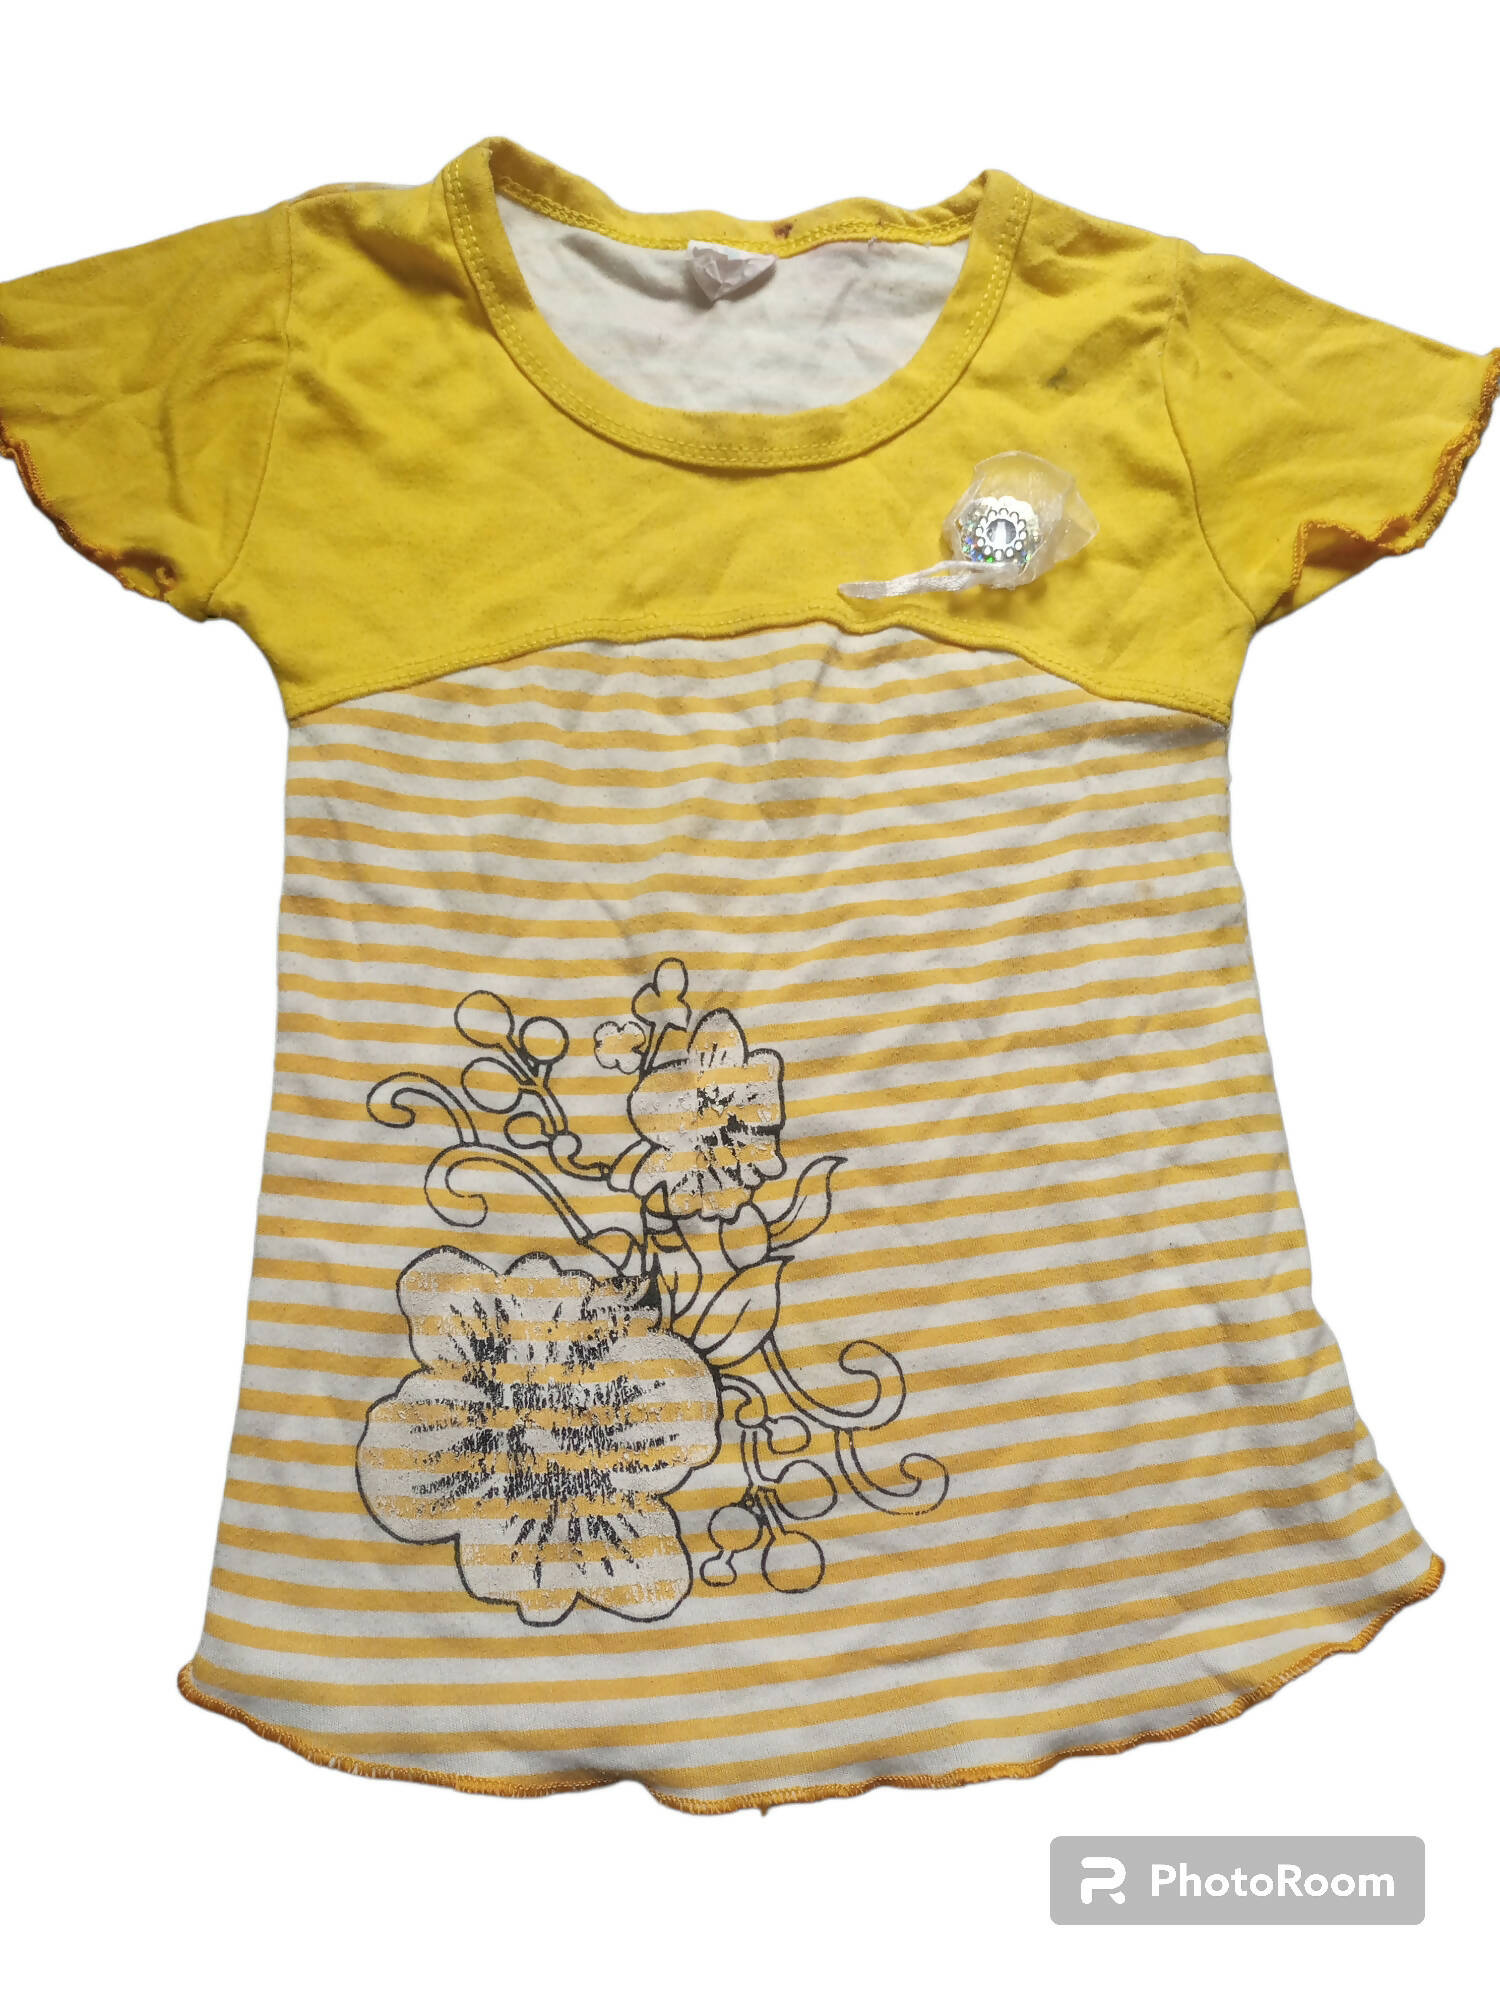 Yellow T shirt for girls (Size: M ) | Girls Tops & Shirts | Preloved